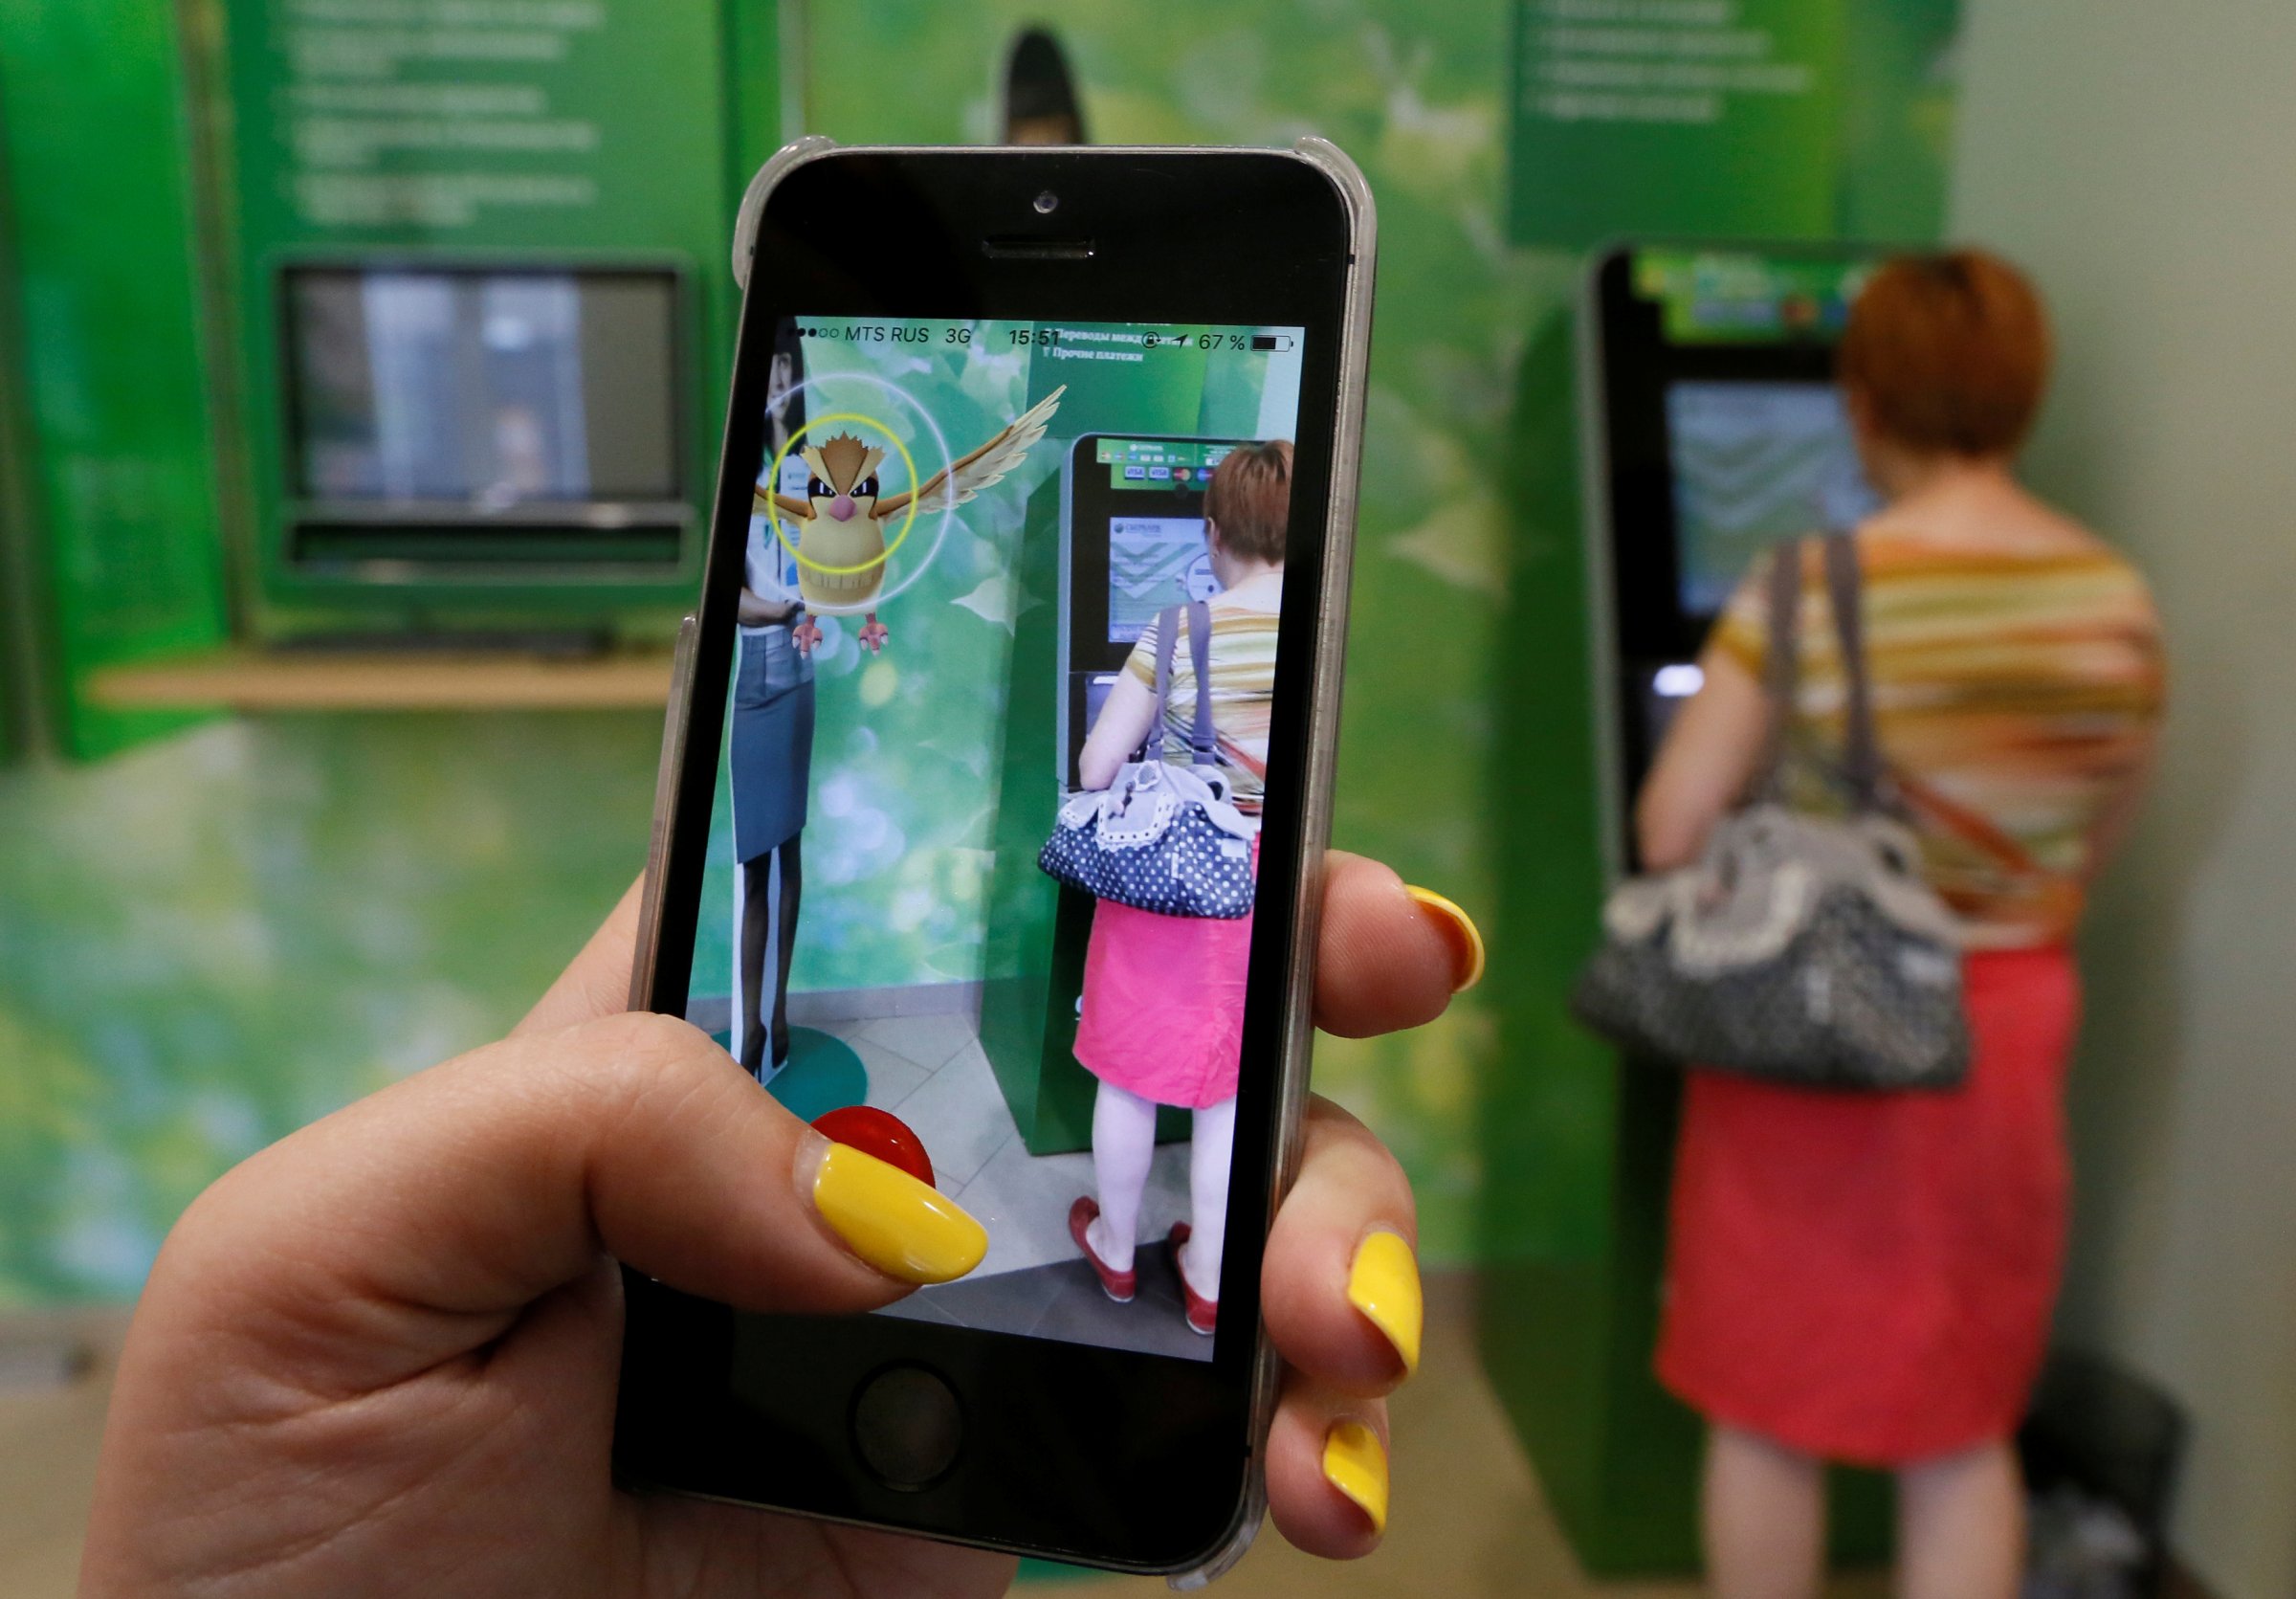 Woman plays augmented reality mobile game "Pokemon Go" by Nintendo at branch of Sberbank in central Krasnoyarsk